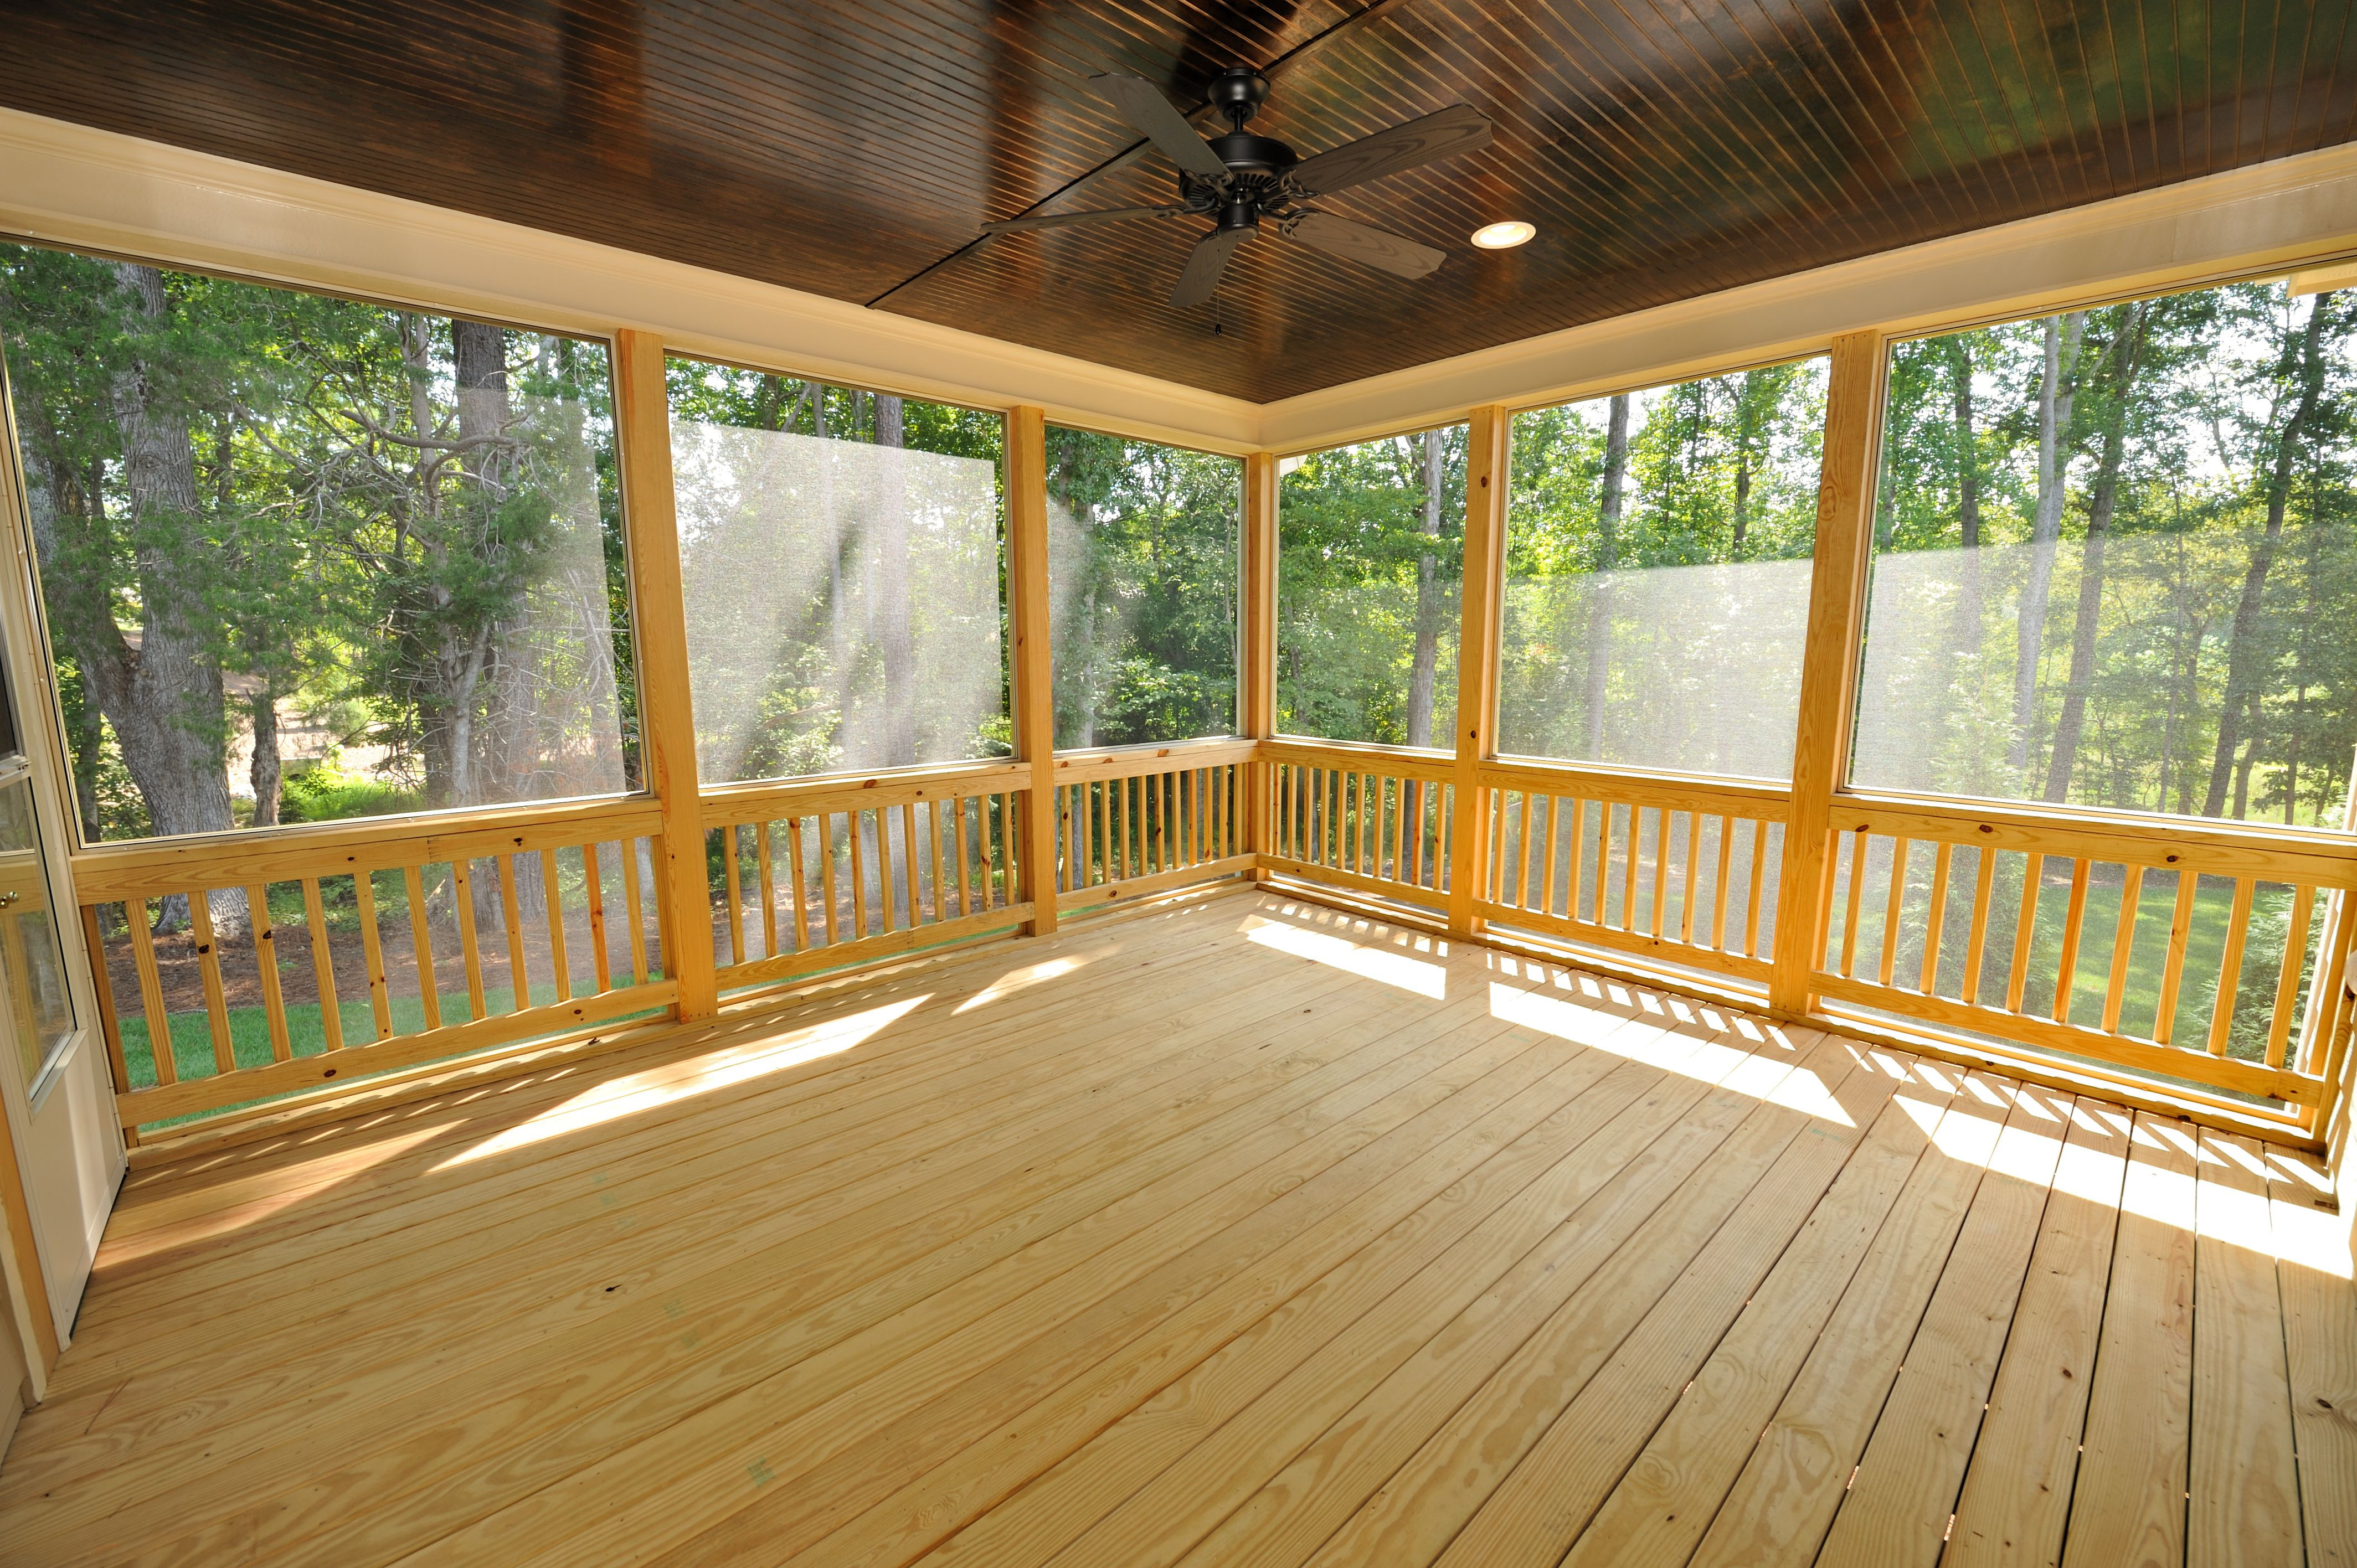 hardwood floor refinishing las vegas of does your deck have these 7 safety and repair issues regarding gettyimages 157649260 5788aa0b5f9b584d206e8c46